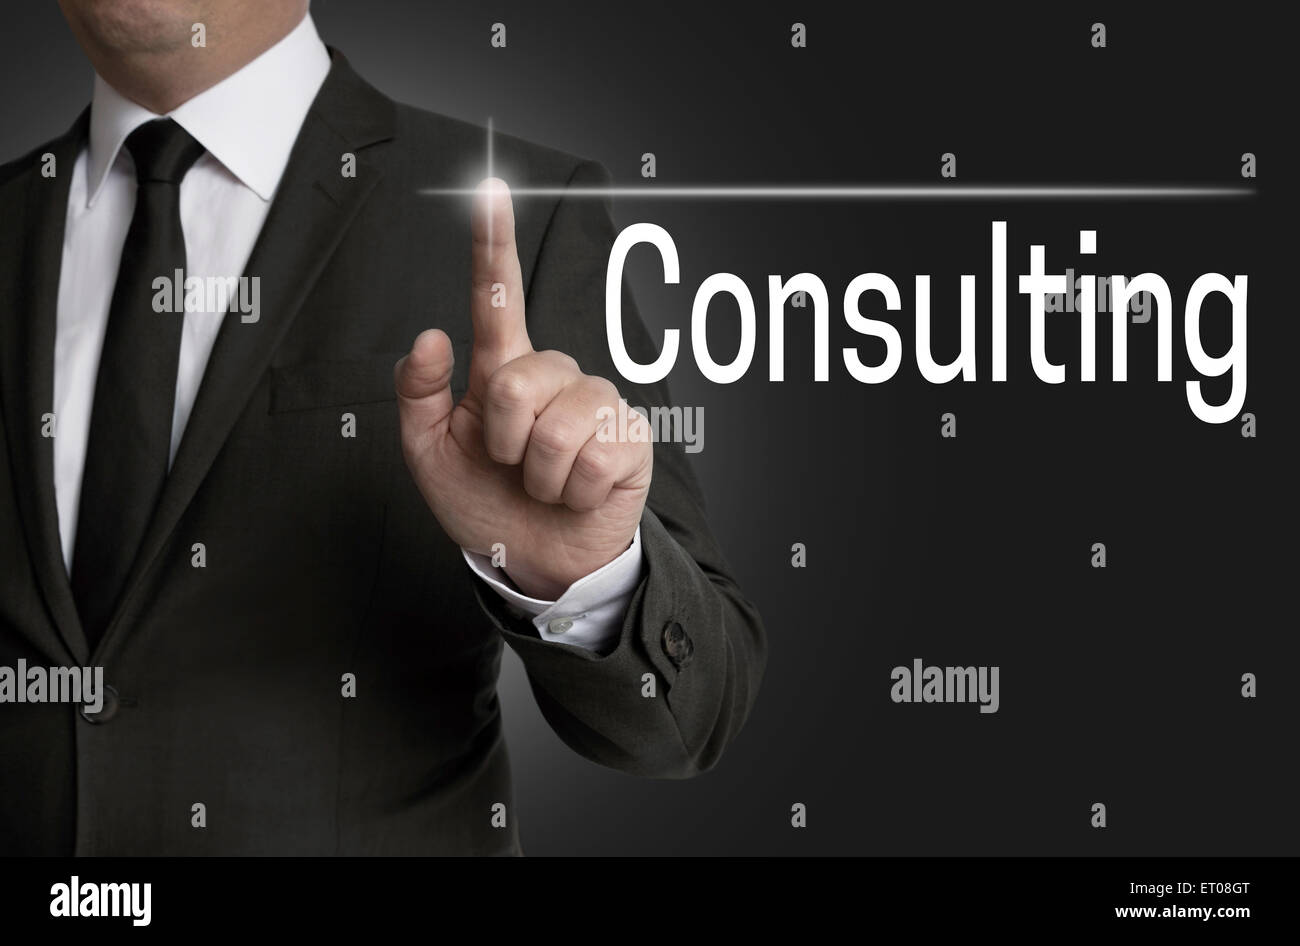 consulting touchscreen is operated by businessman. Stock Photo